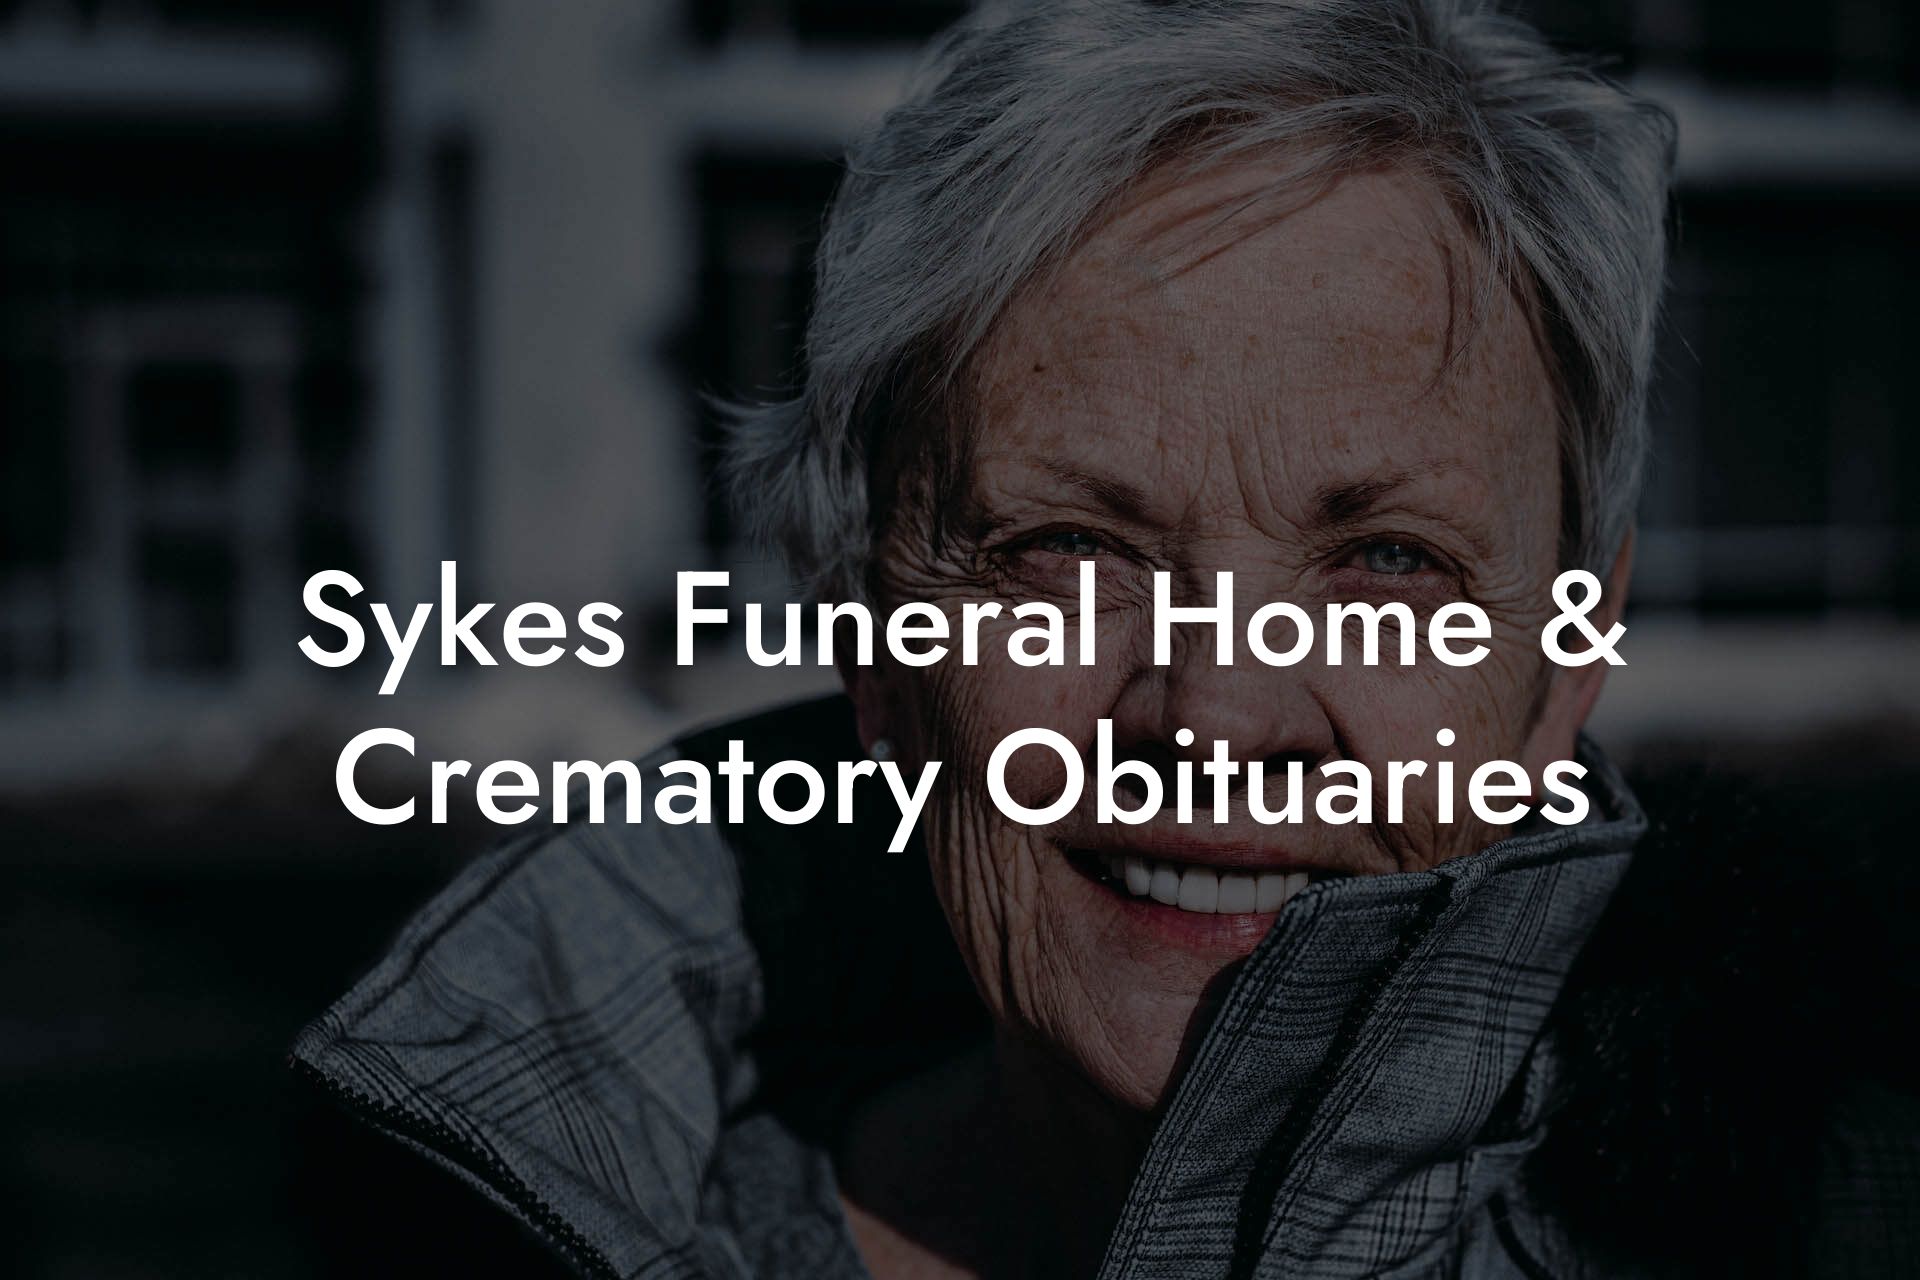 Sykes Funeral Home & Crematory Obituaries